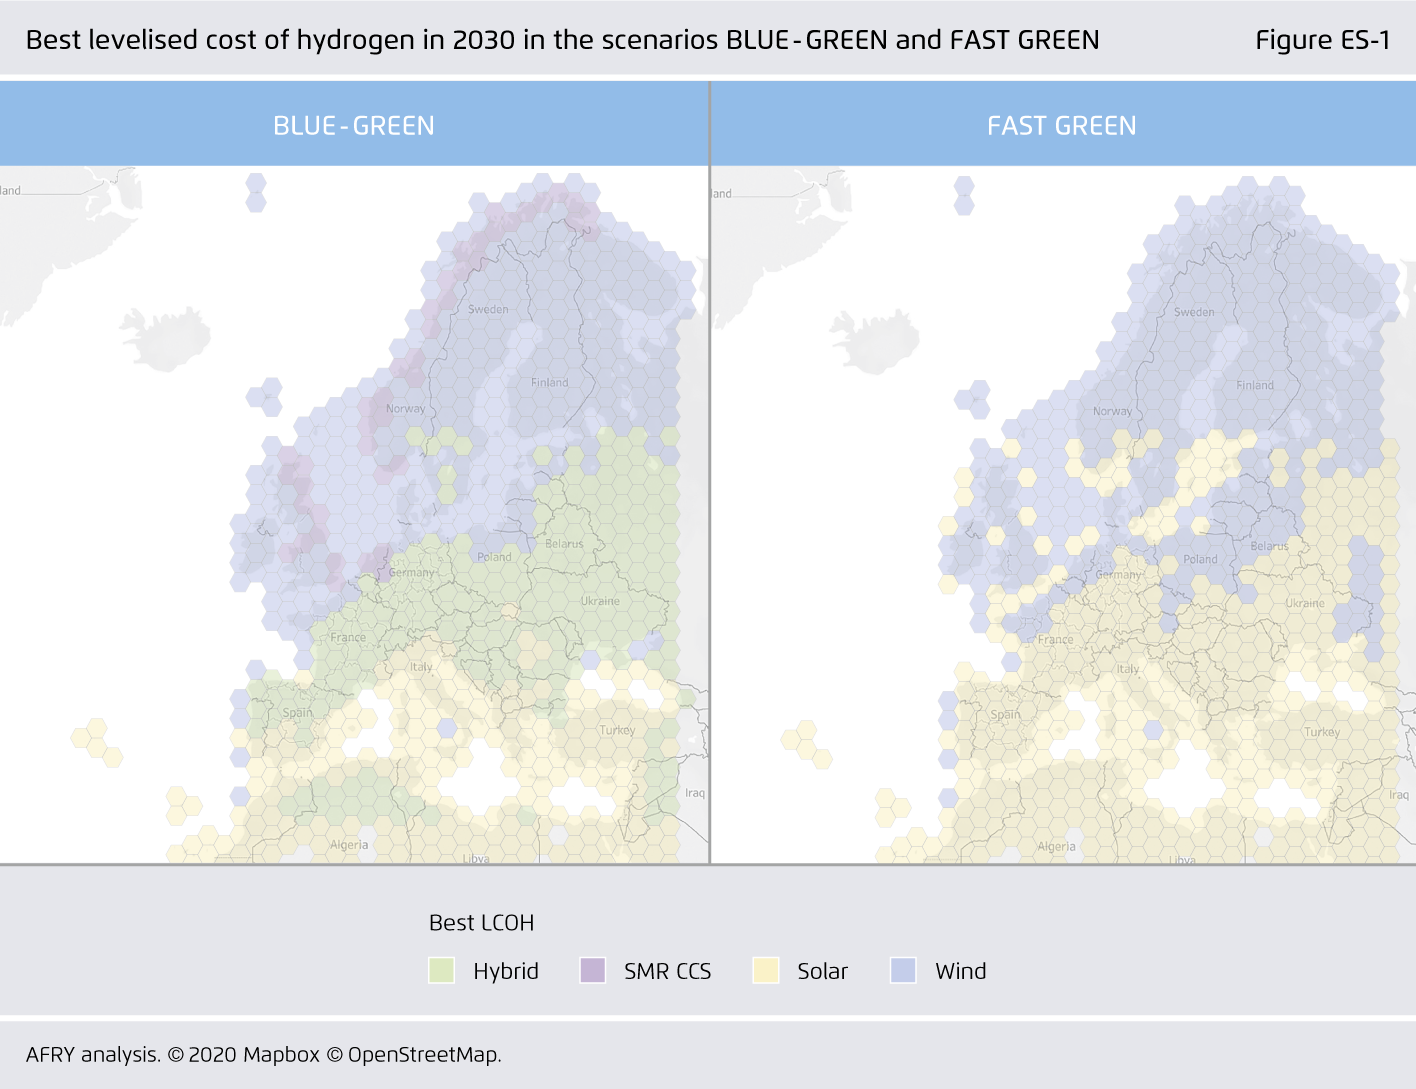 Preview for Best levelised cost of hydrogen in 2030 in the scenarios BLUE-GREEN and FAST GREEN